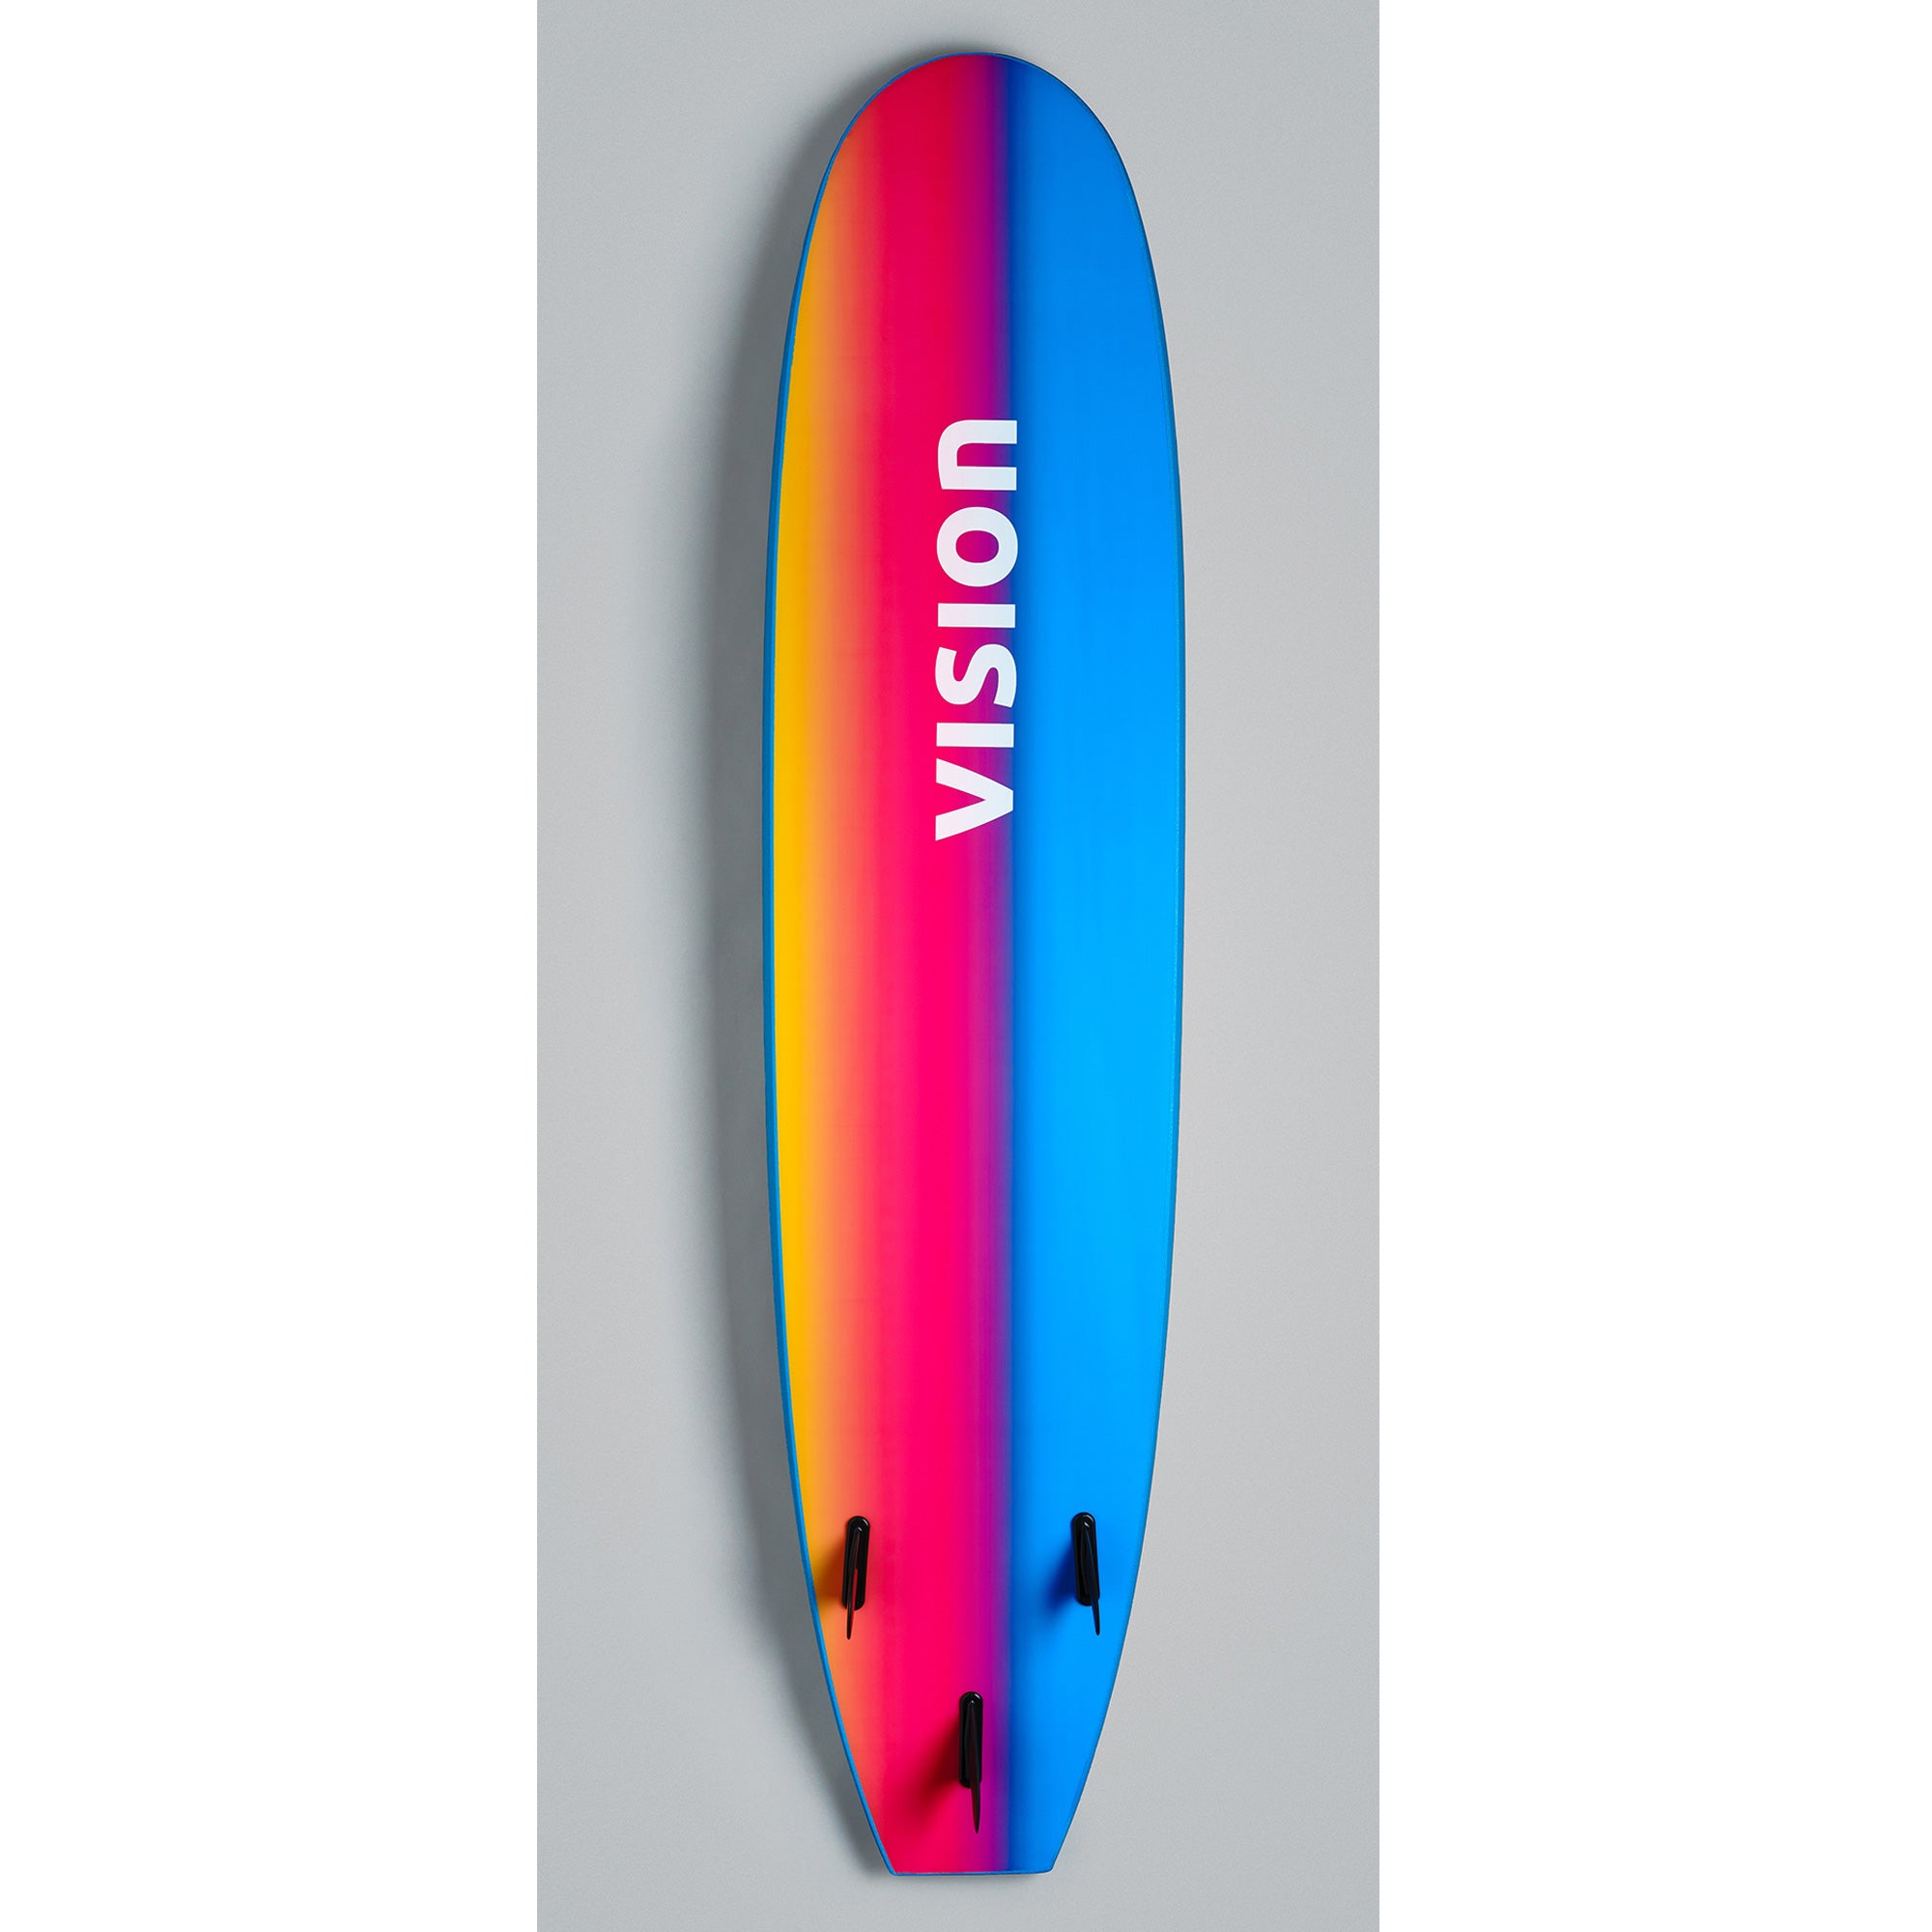 Vision Ignite Soft Surfboard - Blue/Psychedelic